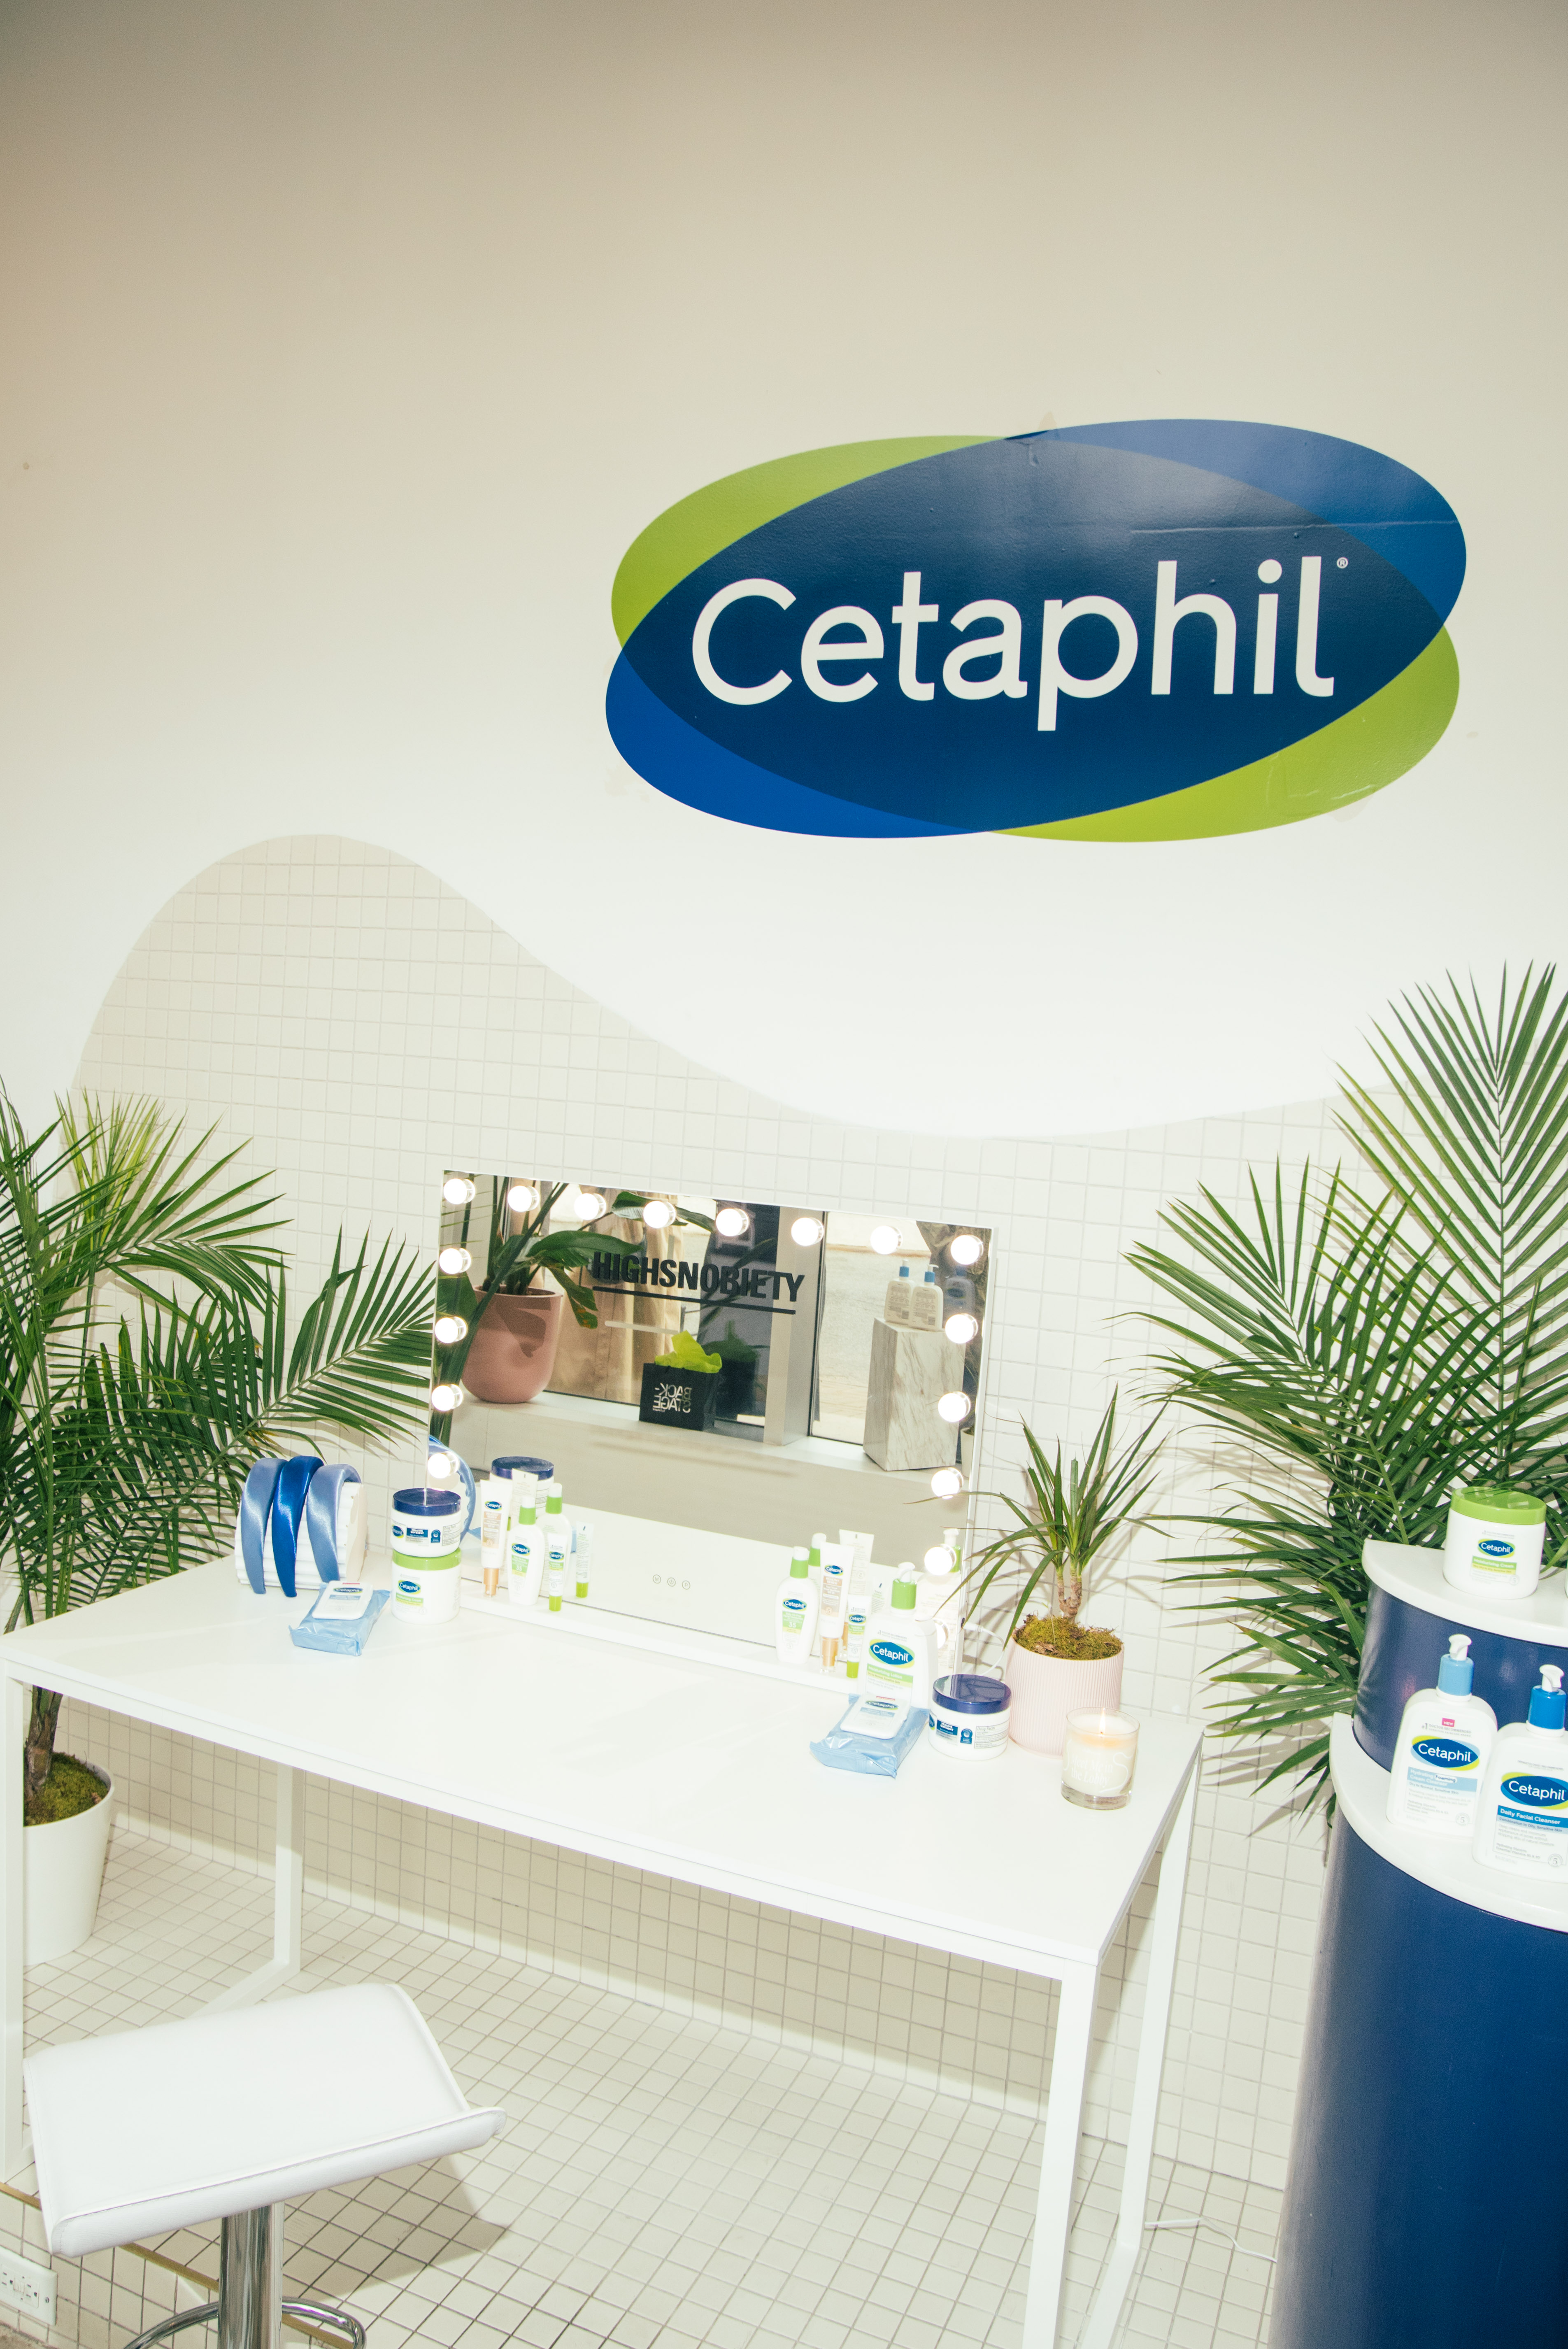 Highsnobiety and Cetaphil event at Chillhouse in soho during New York Fashion Week